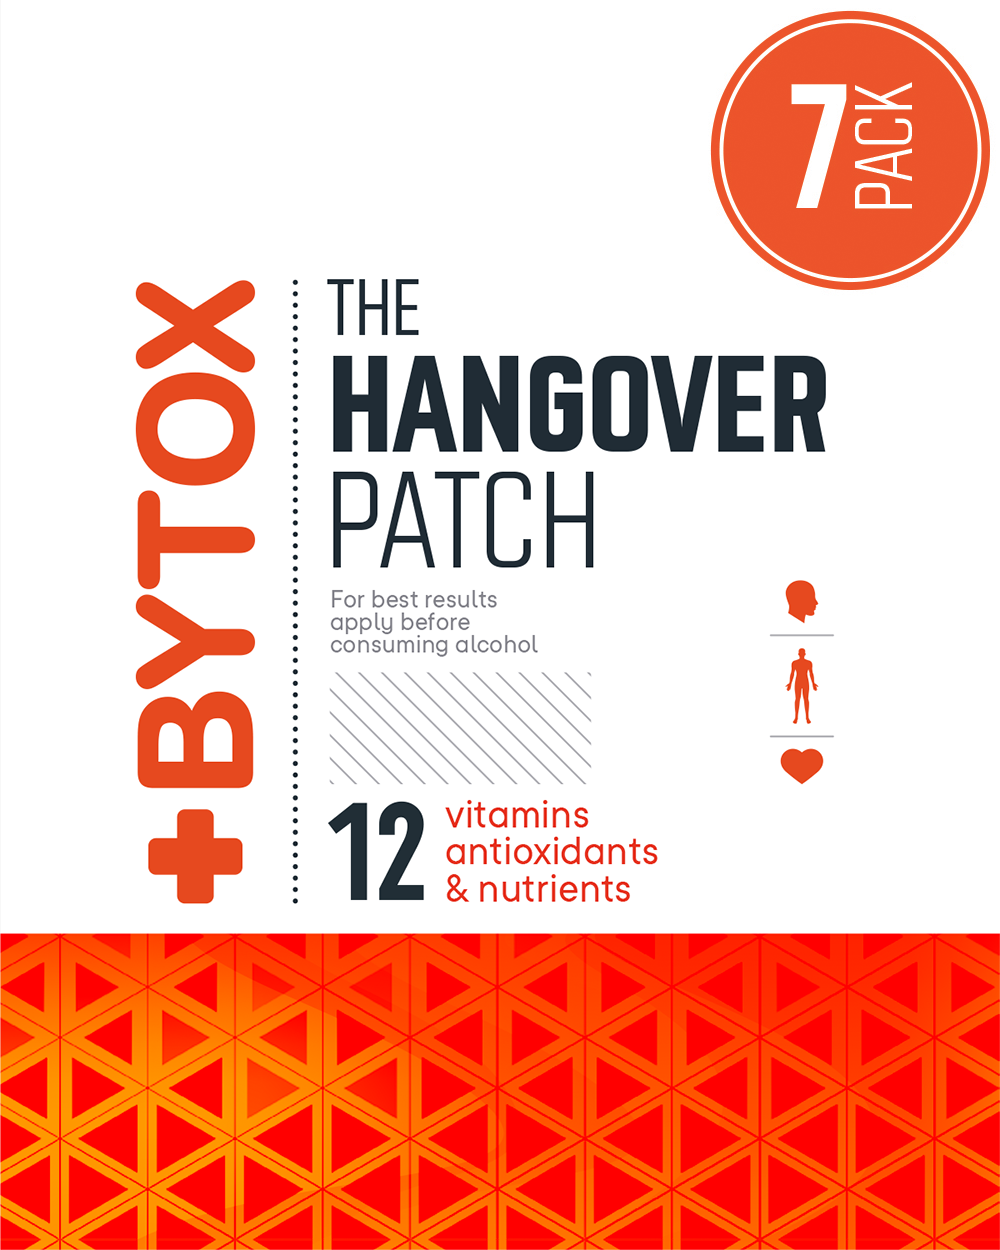 Bundle of 4 x 7s Pack Bytox Hangover Patches